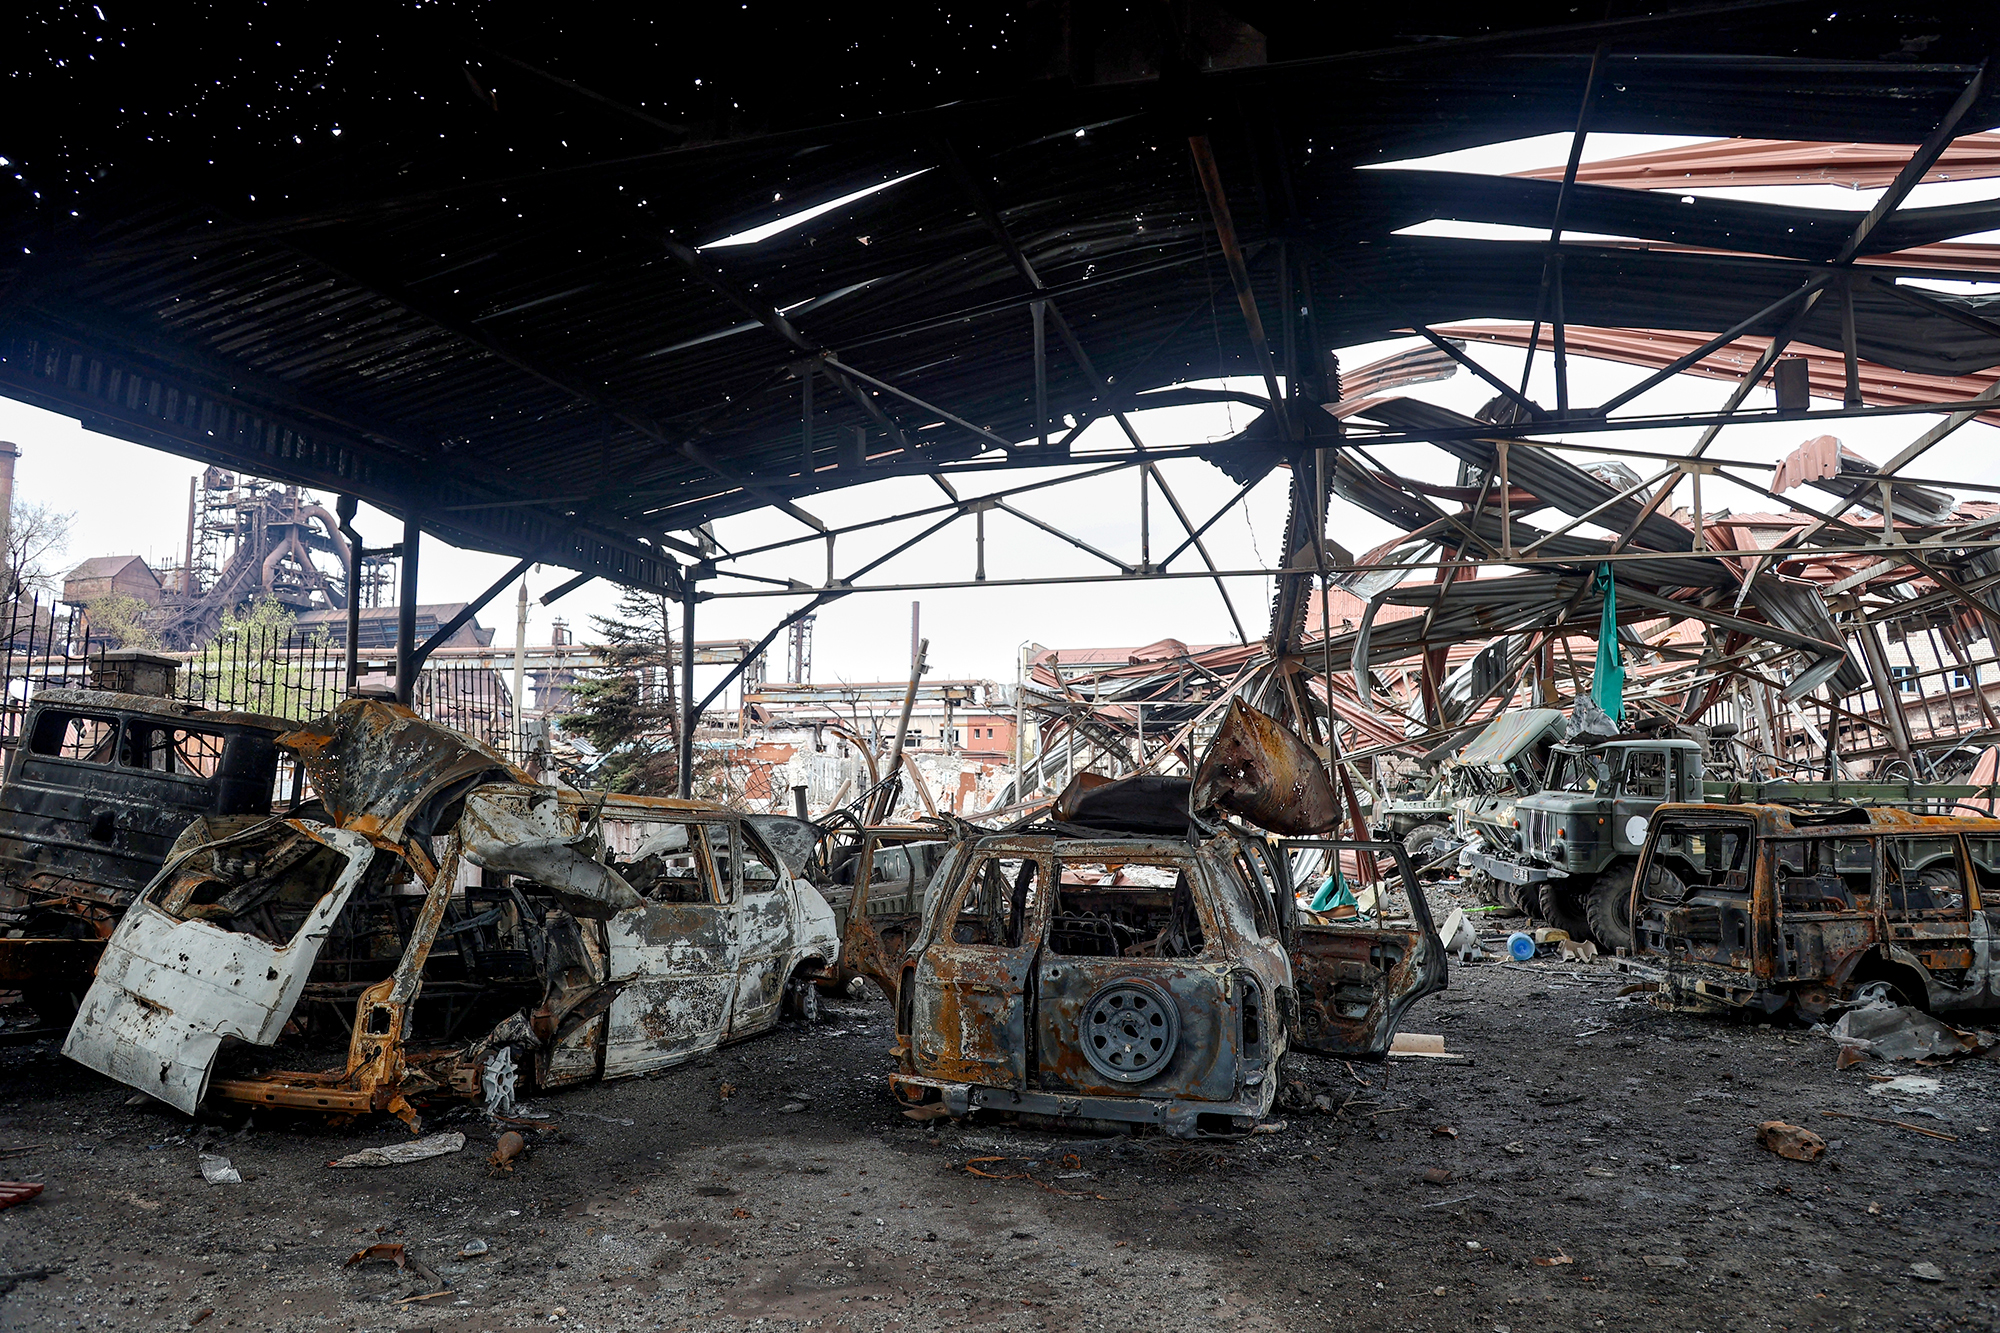 The gutted remains of vehicles are seen at the Illich Iron & Steel Works Metallurgical Plant in Mariupol, Ukraine on April 16.